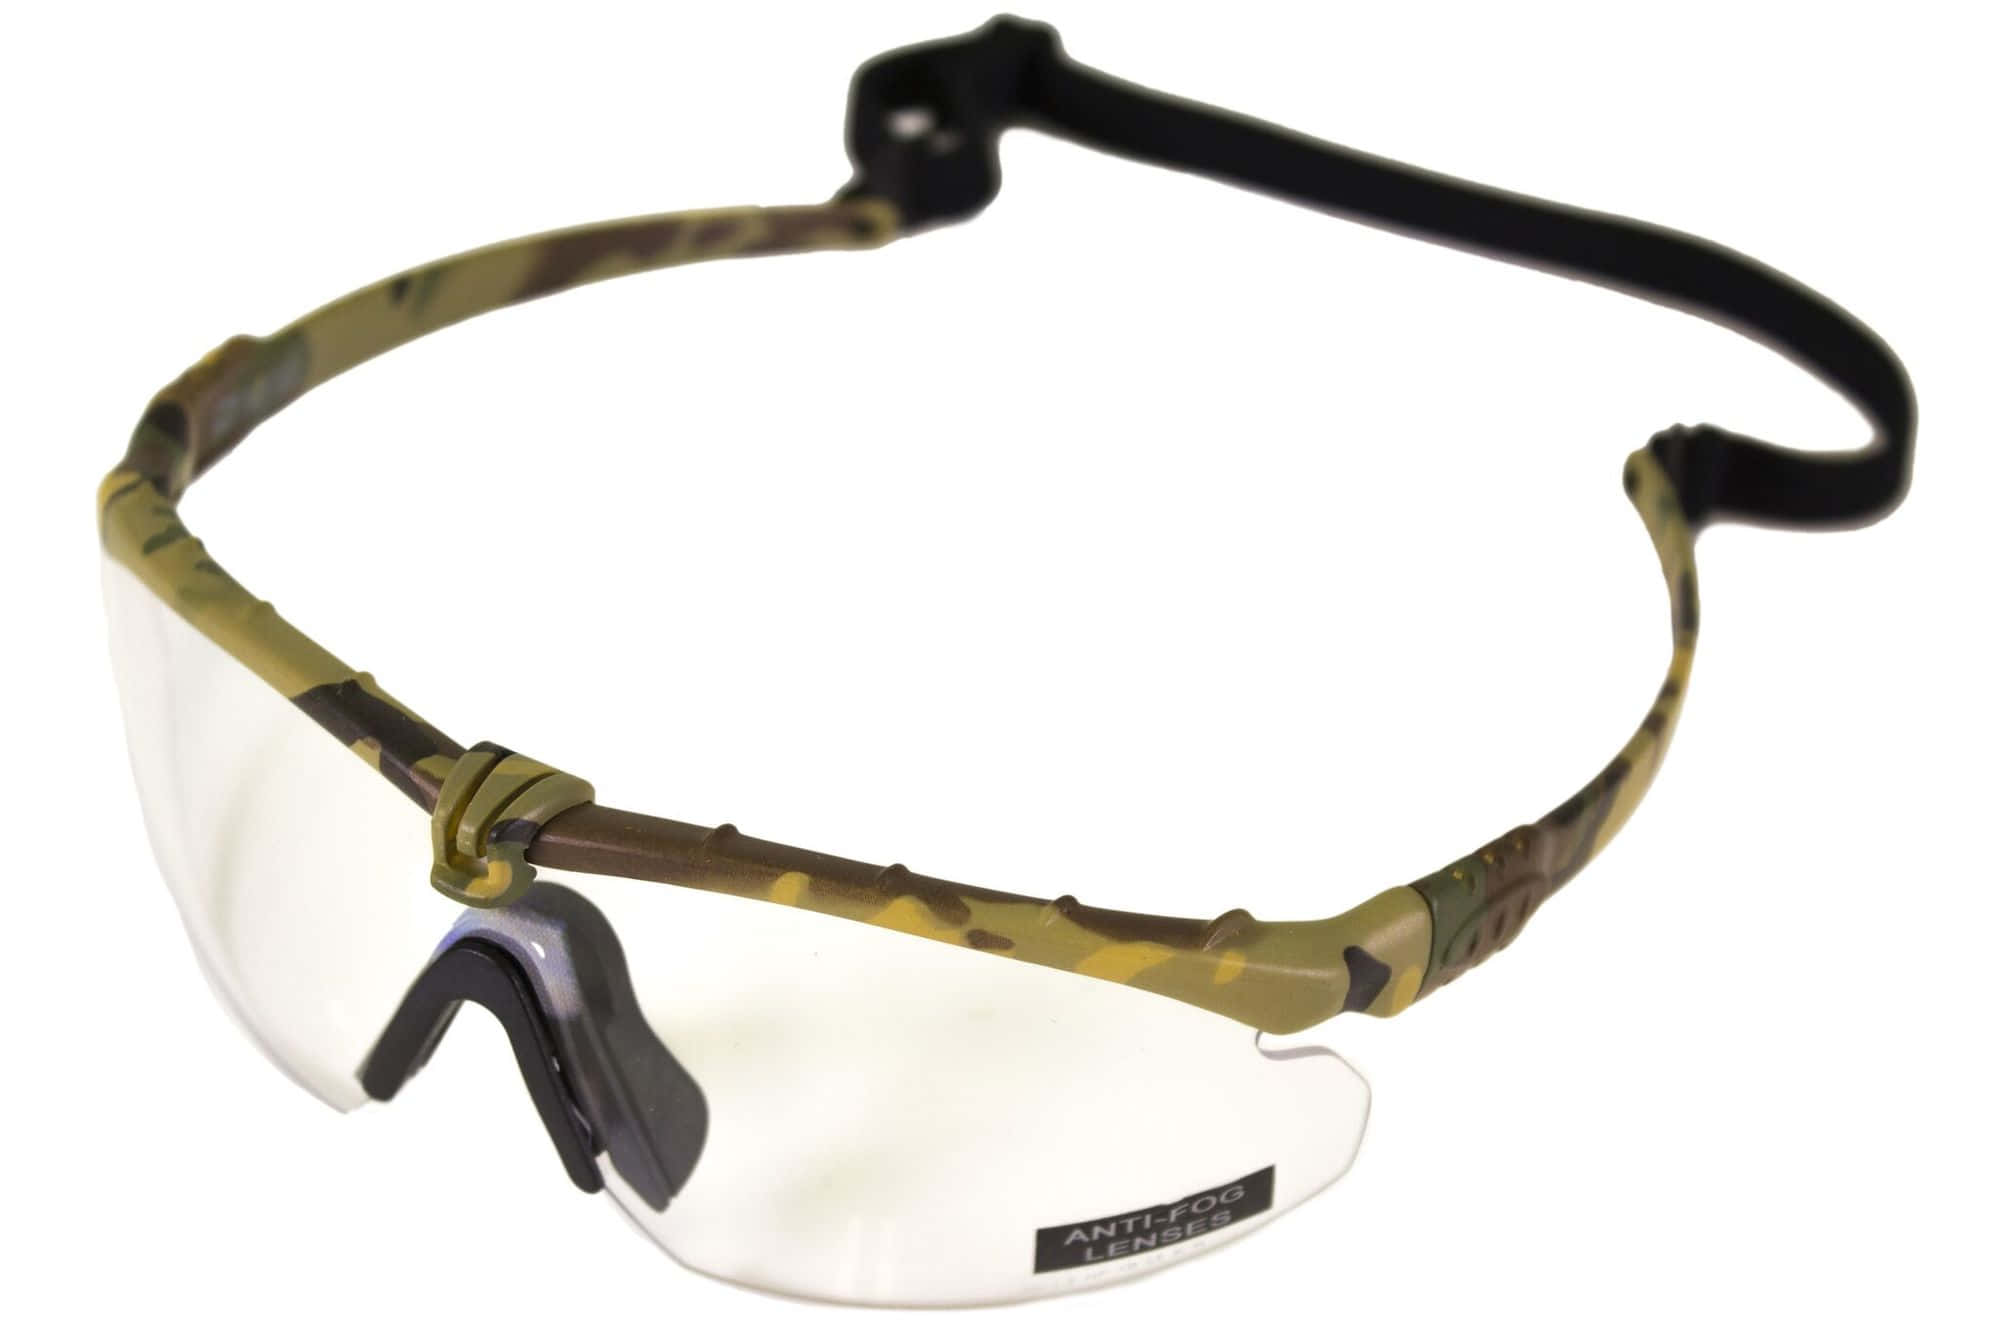 Lunettes Battle Pro Thermal Camo/Clear - Nuprol - Verre clair - Nuprol